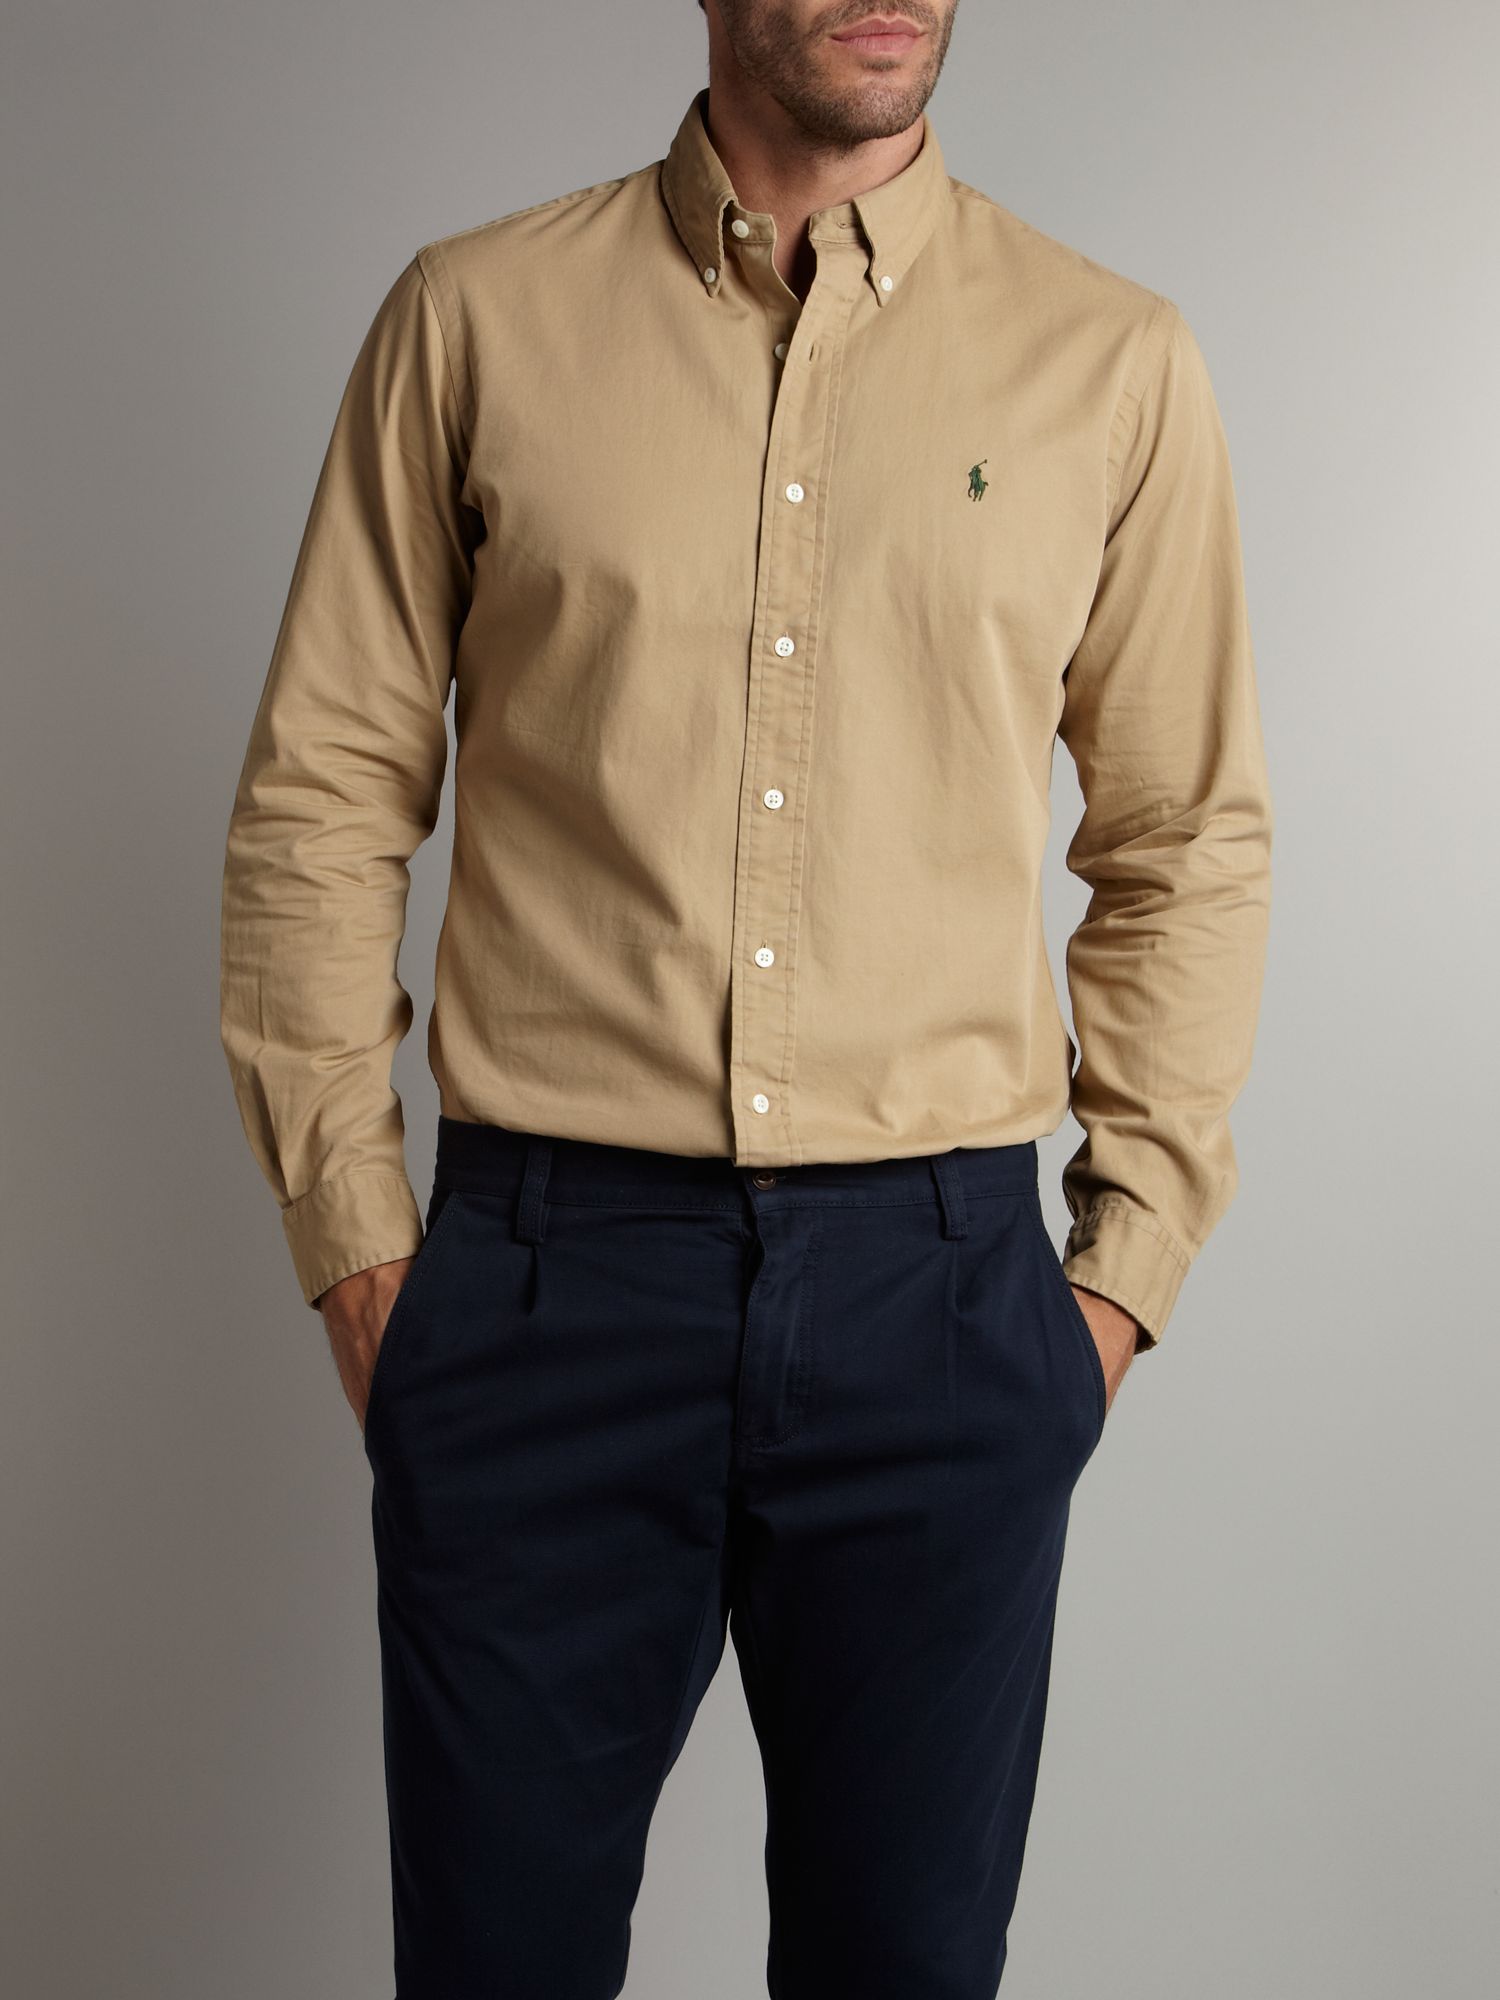 Polo ralph lauren Solid Chino Shirt in Natural for Men | Lyst